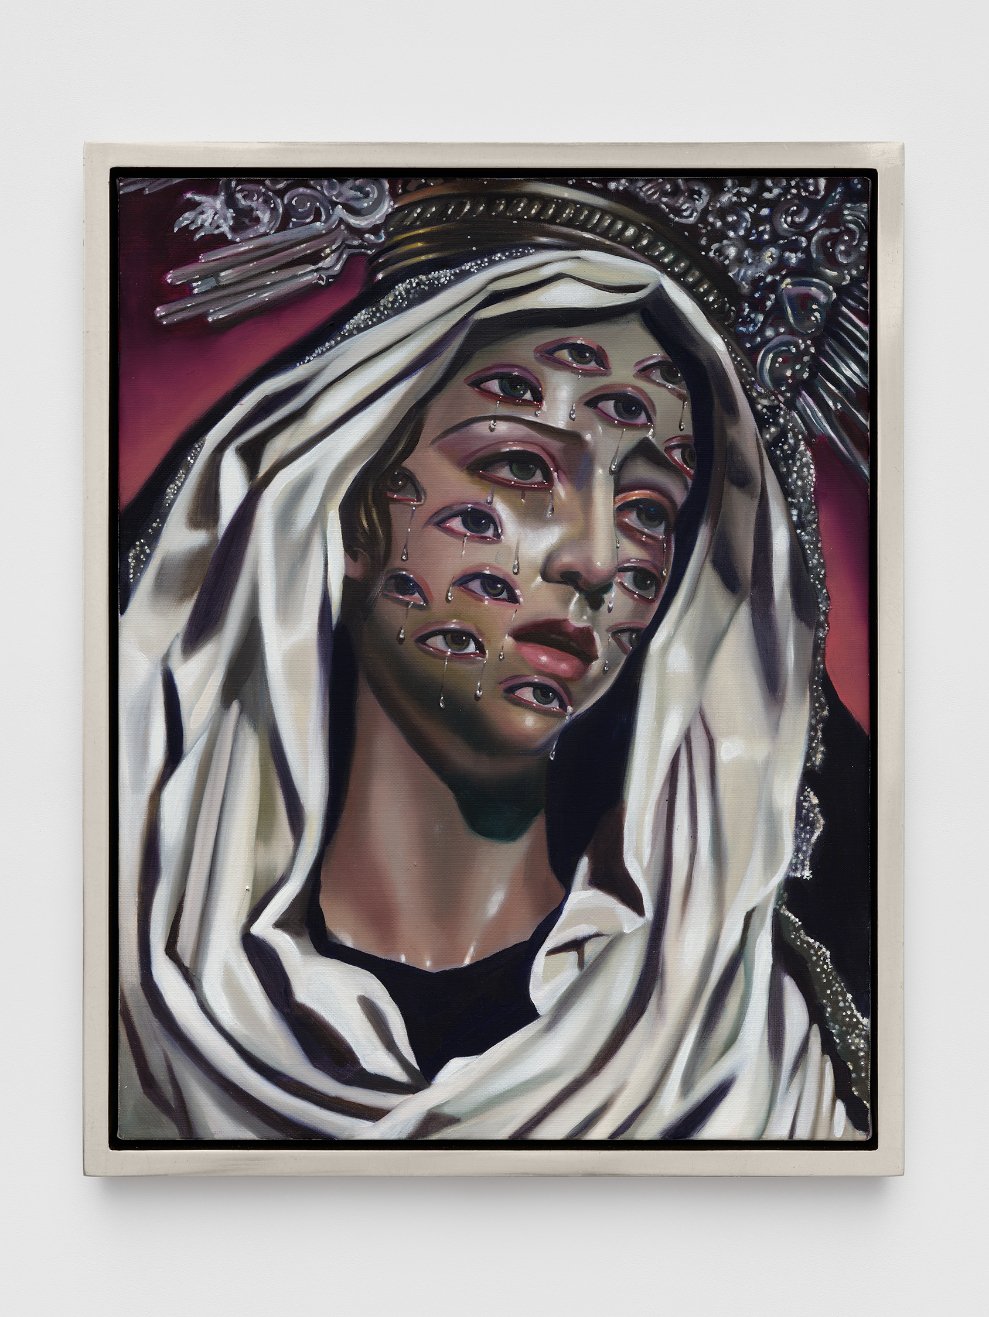  Tali Lennox  The Little Death , 2022 oil on linen 45.72h x 35.56w cm / 18h x 14w in Courtesy of the Artist and Almine Rech Gallery Photography credit: Shark Senesac, New Document 